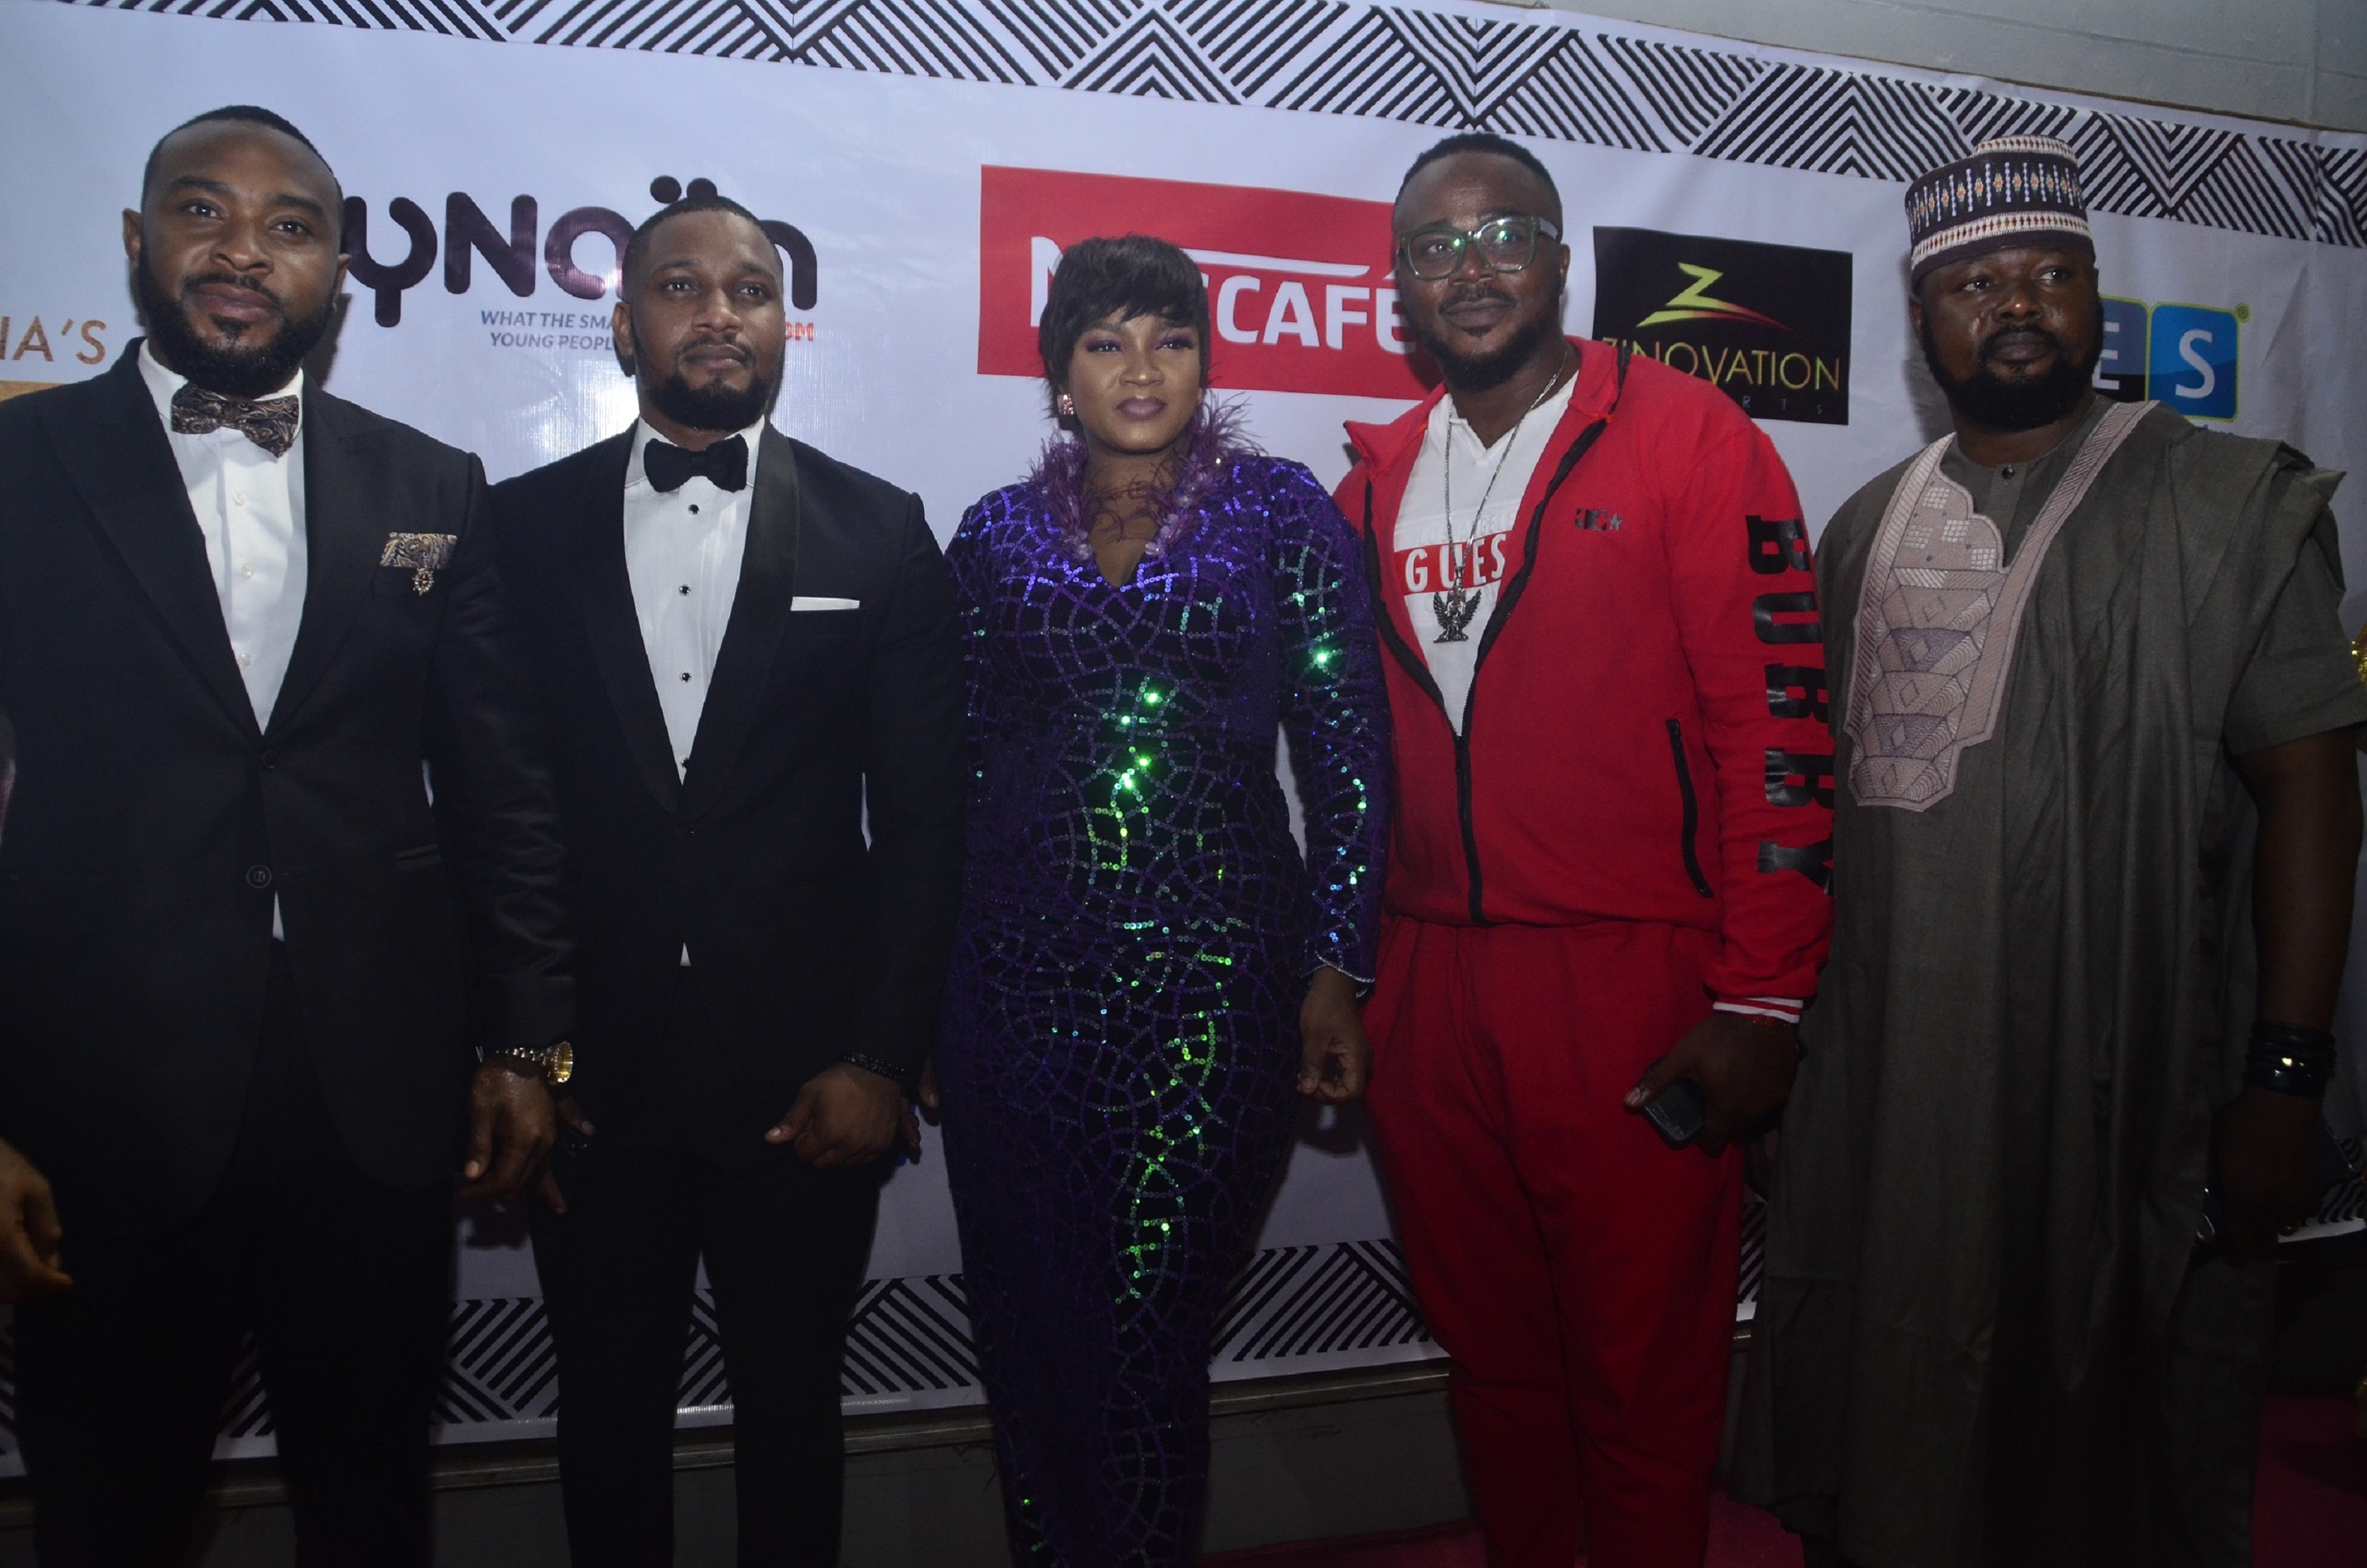 L-R Enyinna Nwigwe, Nollywood Actor; Charles Odii, Organizer of 25Under25 Awards; Omotola Jalade-Ekeinde, Nollywood Actress; Bobby Michaels, Nollywood actor and Ismail Olalekan, Head, Home and Broadband, Airtel Nigeria during the Airtel Sponsored 25 Under25 SME100 Awards, which held at the Terra Kulture, Victoria Island, Lagos. 